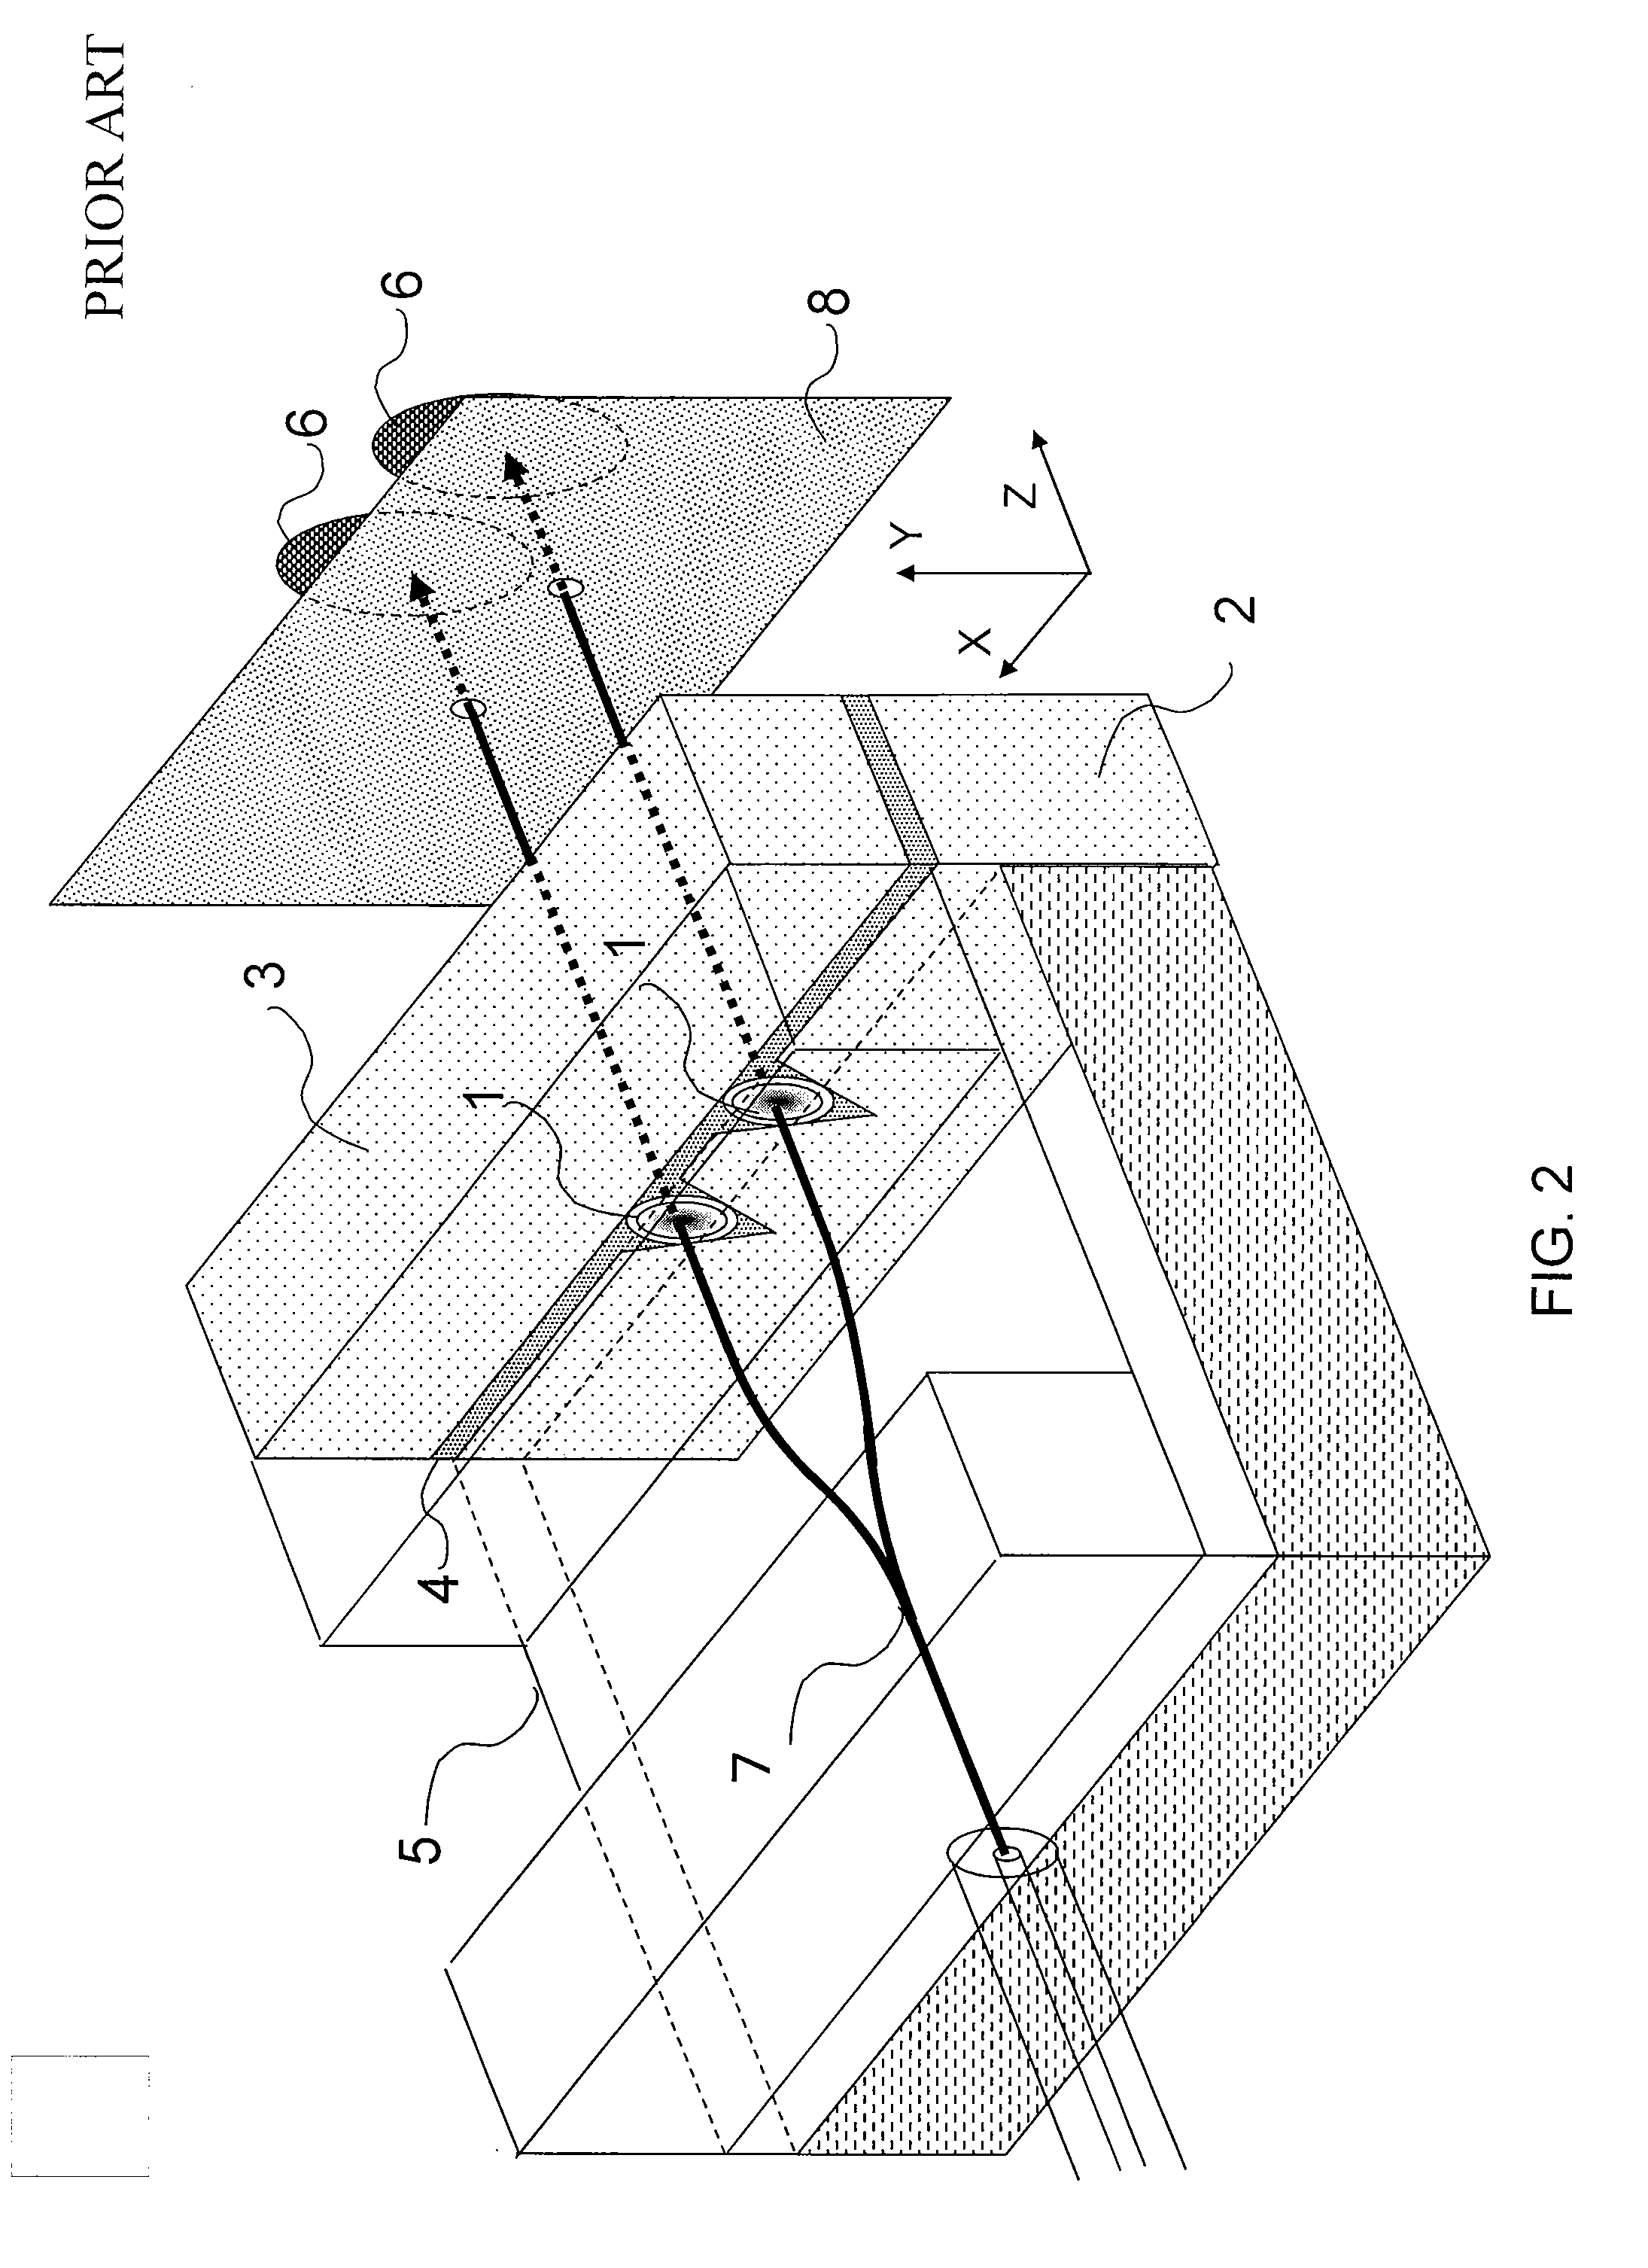 Microlens array and optical transmission component